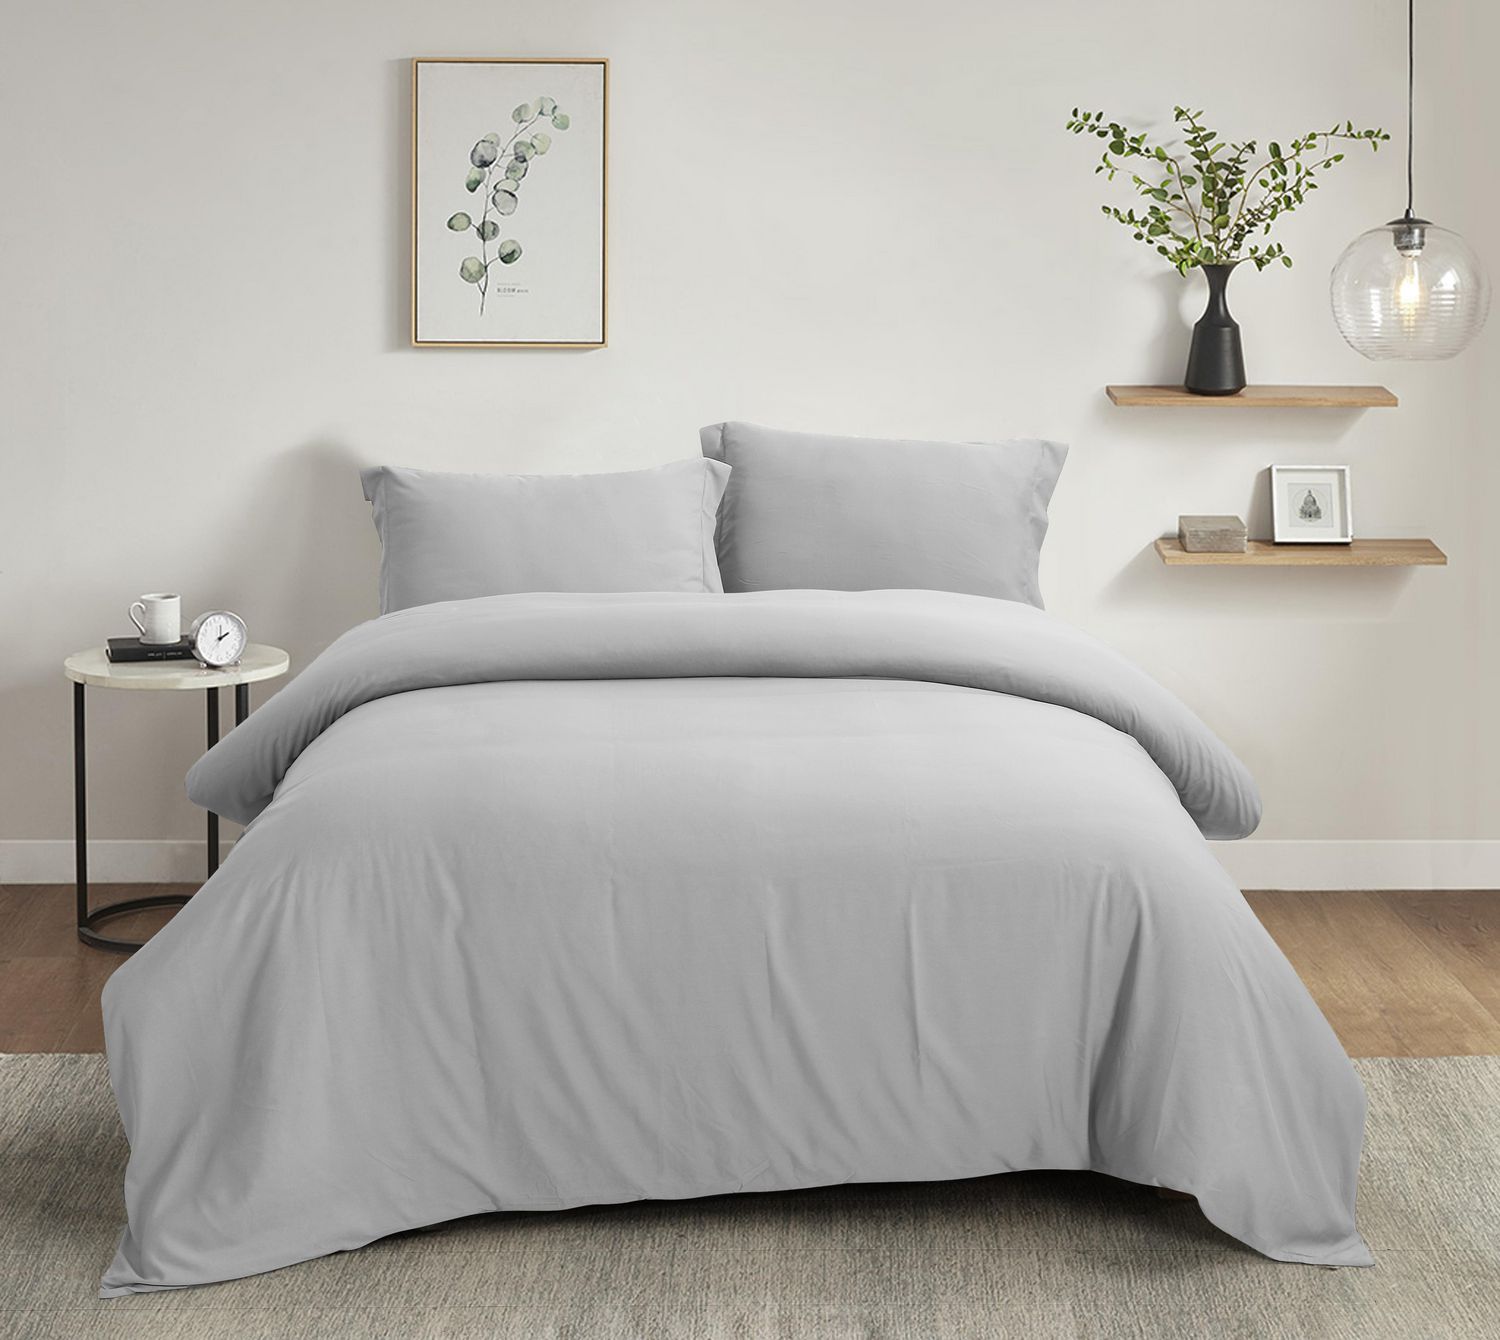 Ultra Soft Solid Duvet Cover Set, What Is Included In A Duvet Cover Set